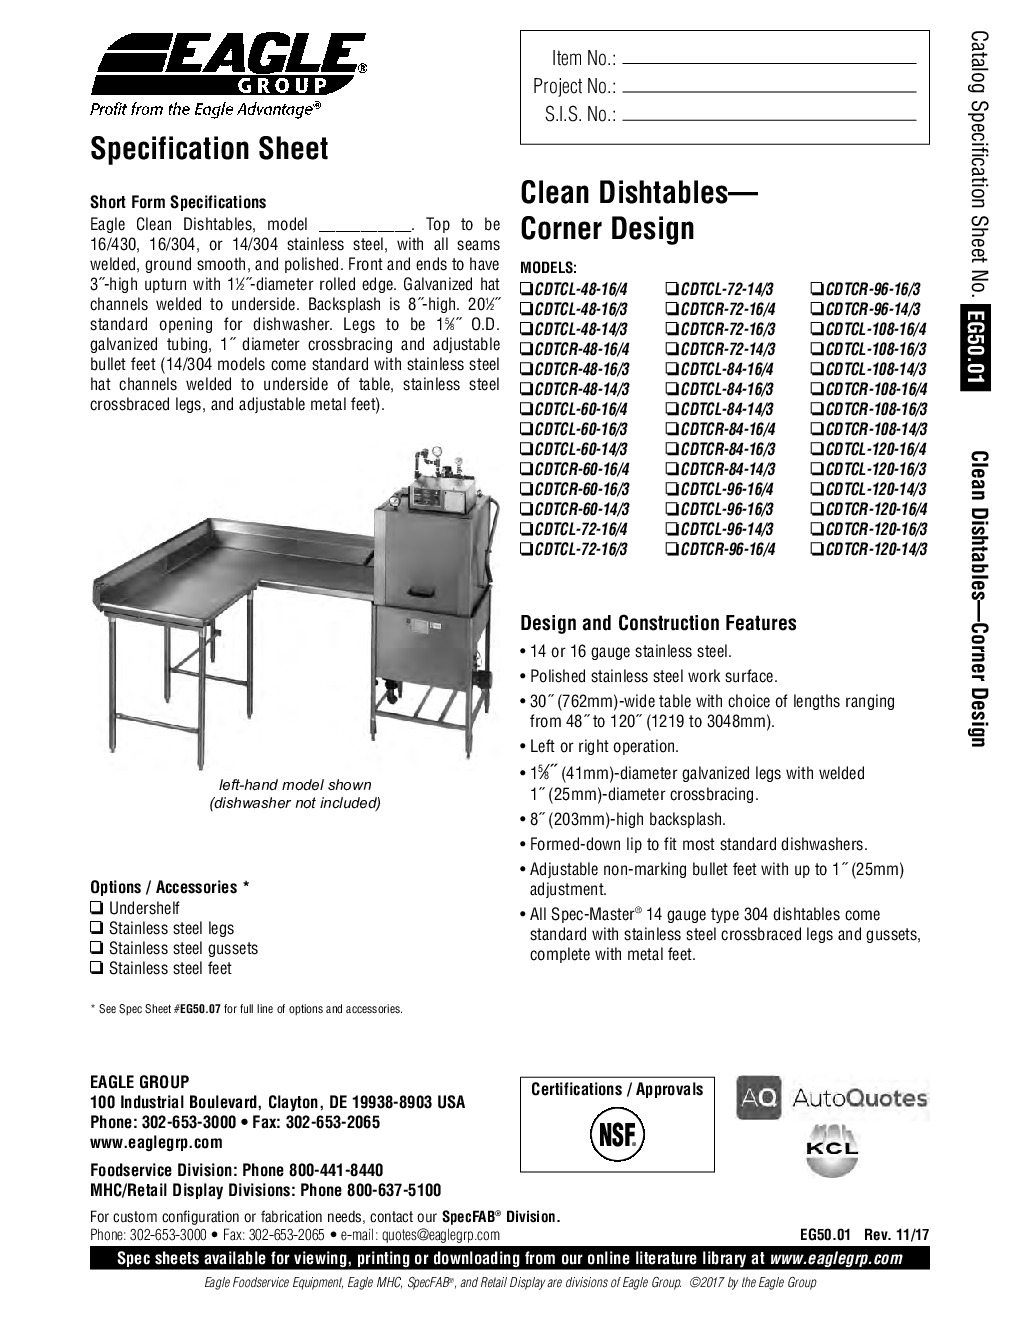 Eagle Group CDTCR-120-14/3 Clean 